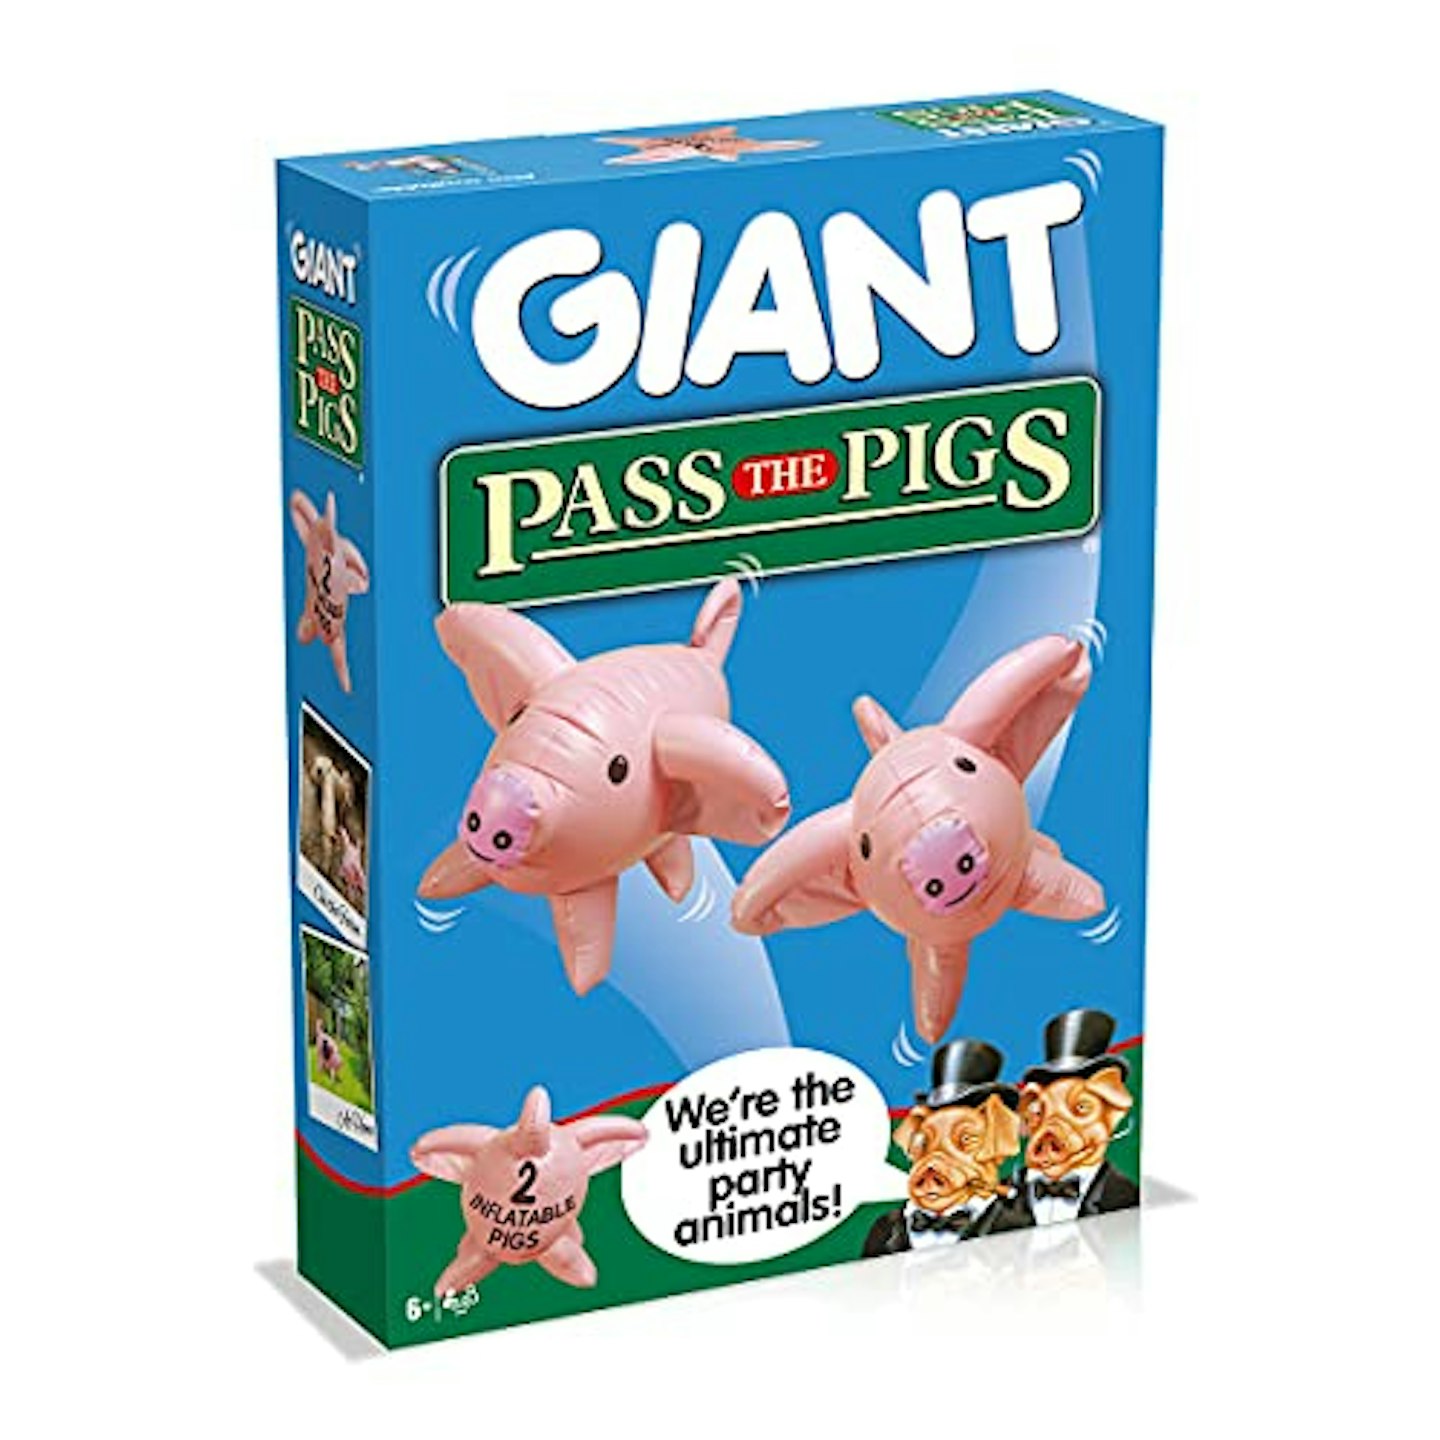 Pass the Pigs Giant Dice Game